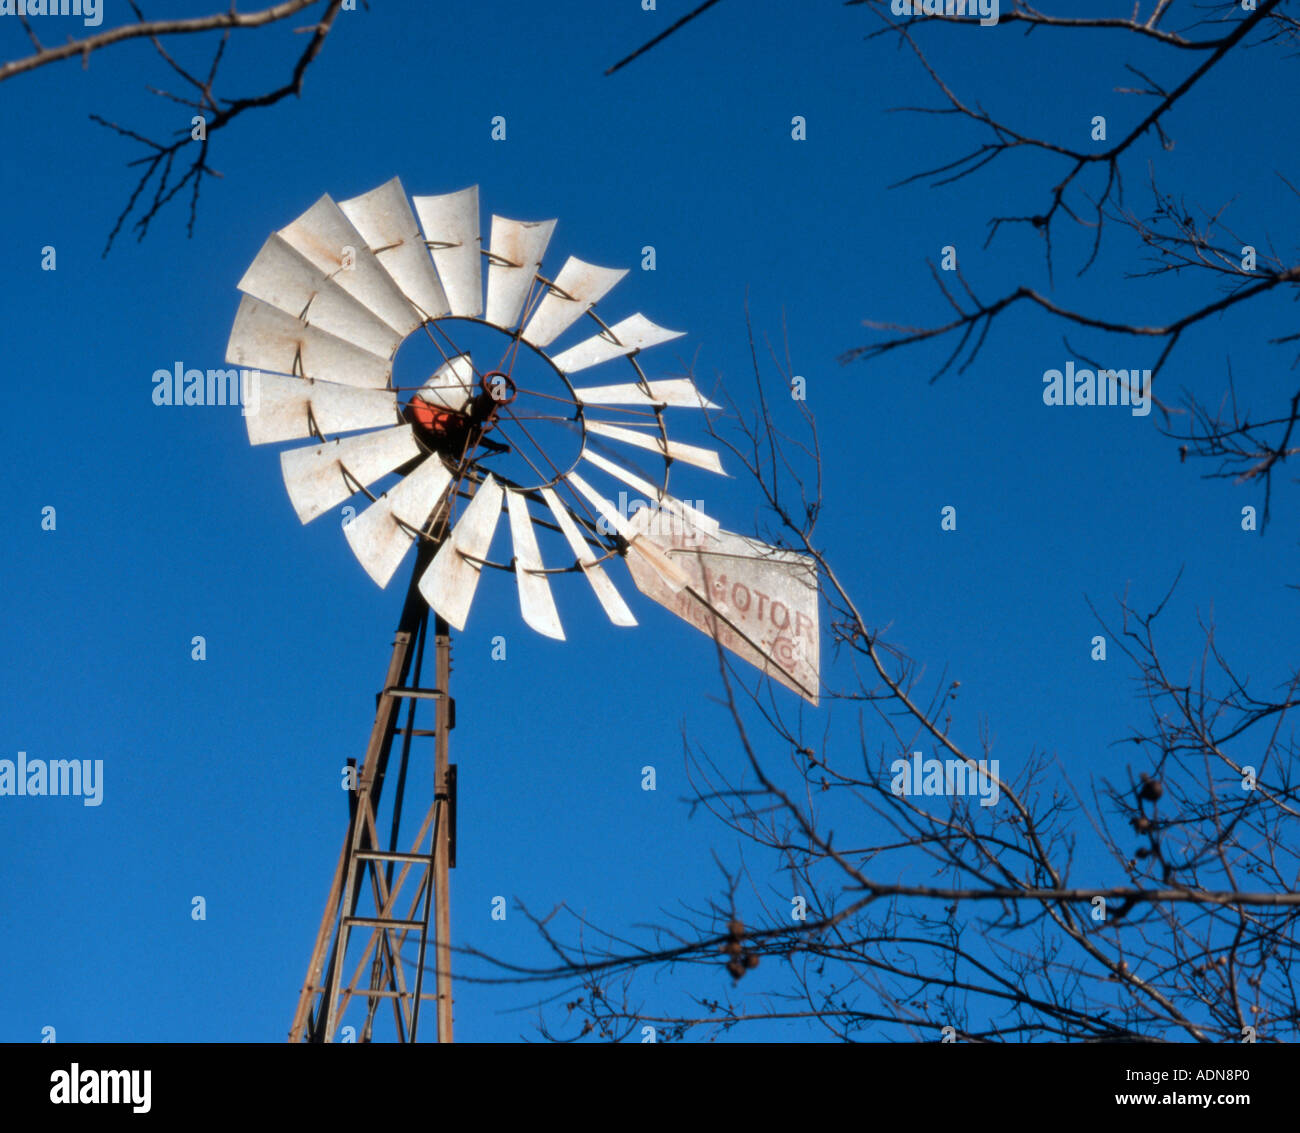 Windmill water pump used for agricultural and ranch irrigation against blue Texas sky Stock Photo